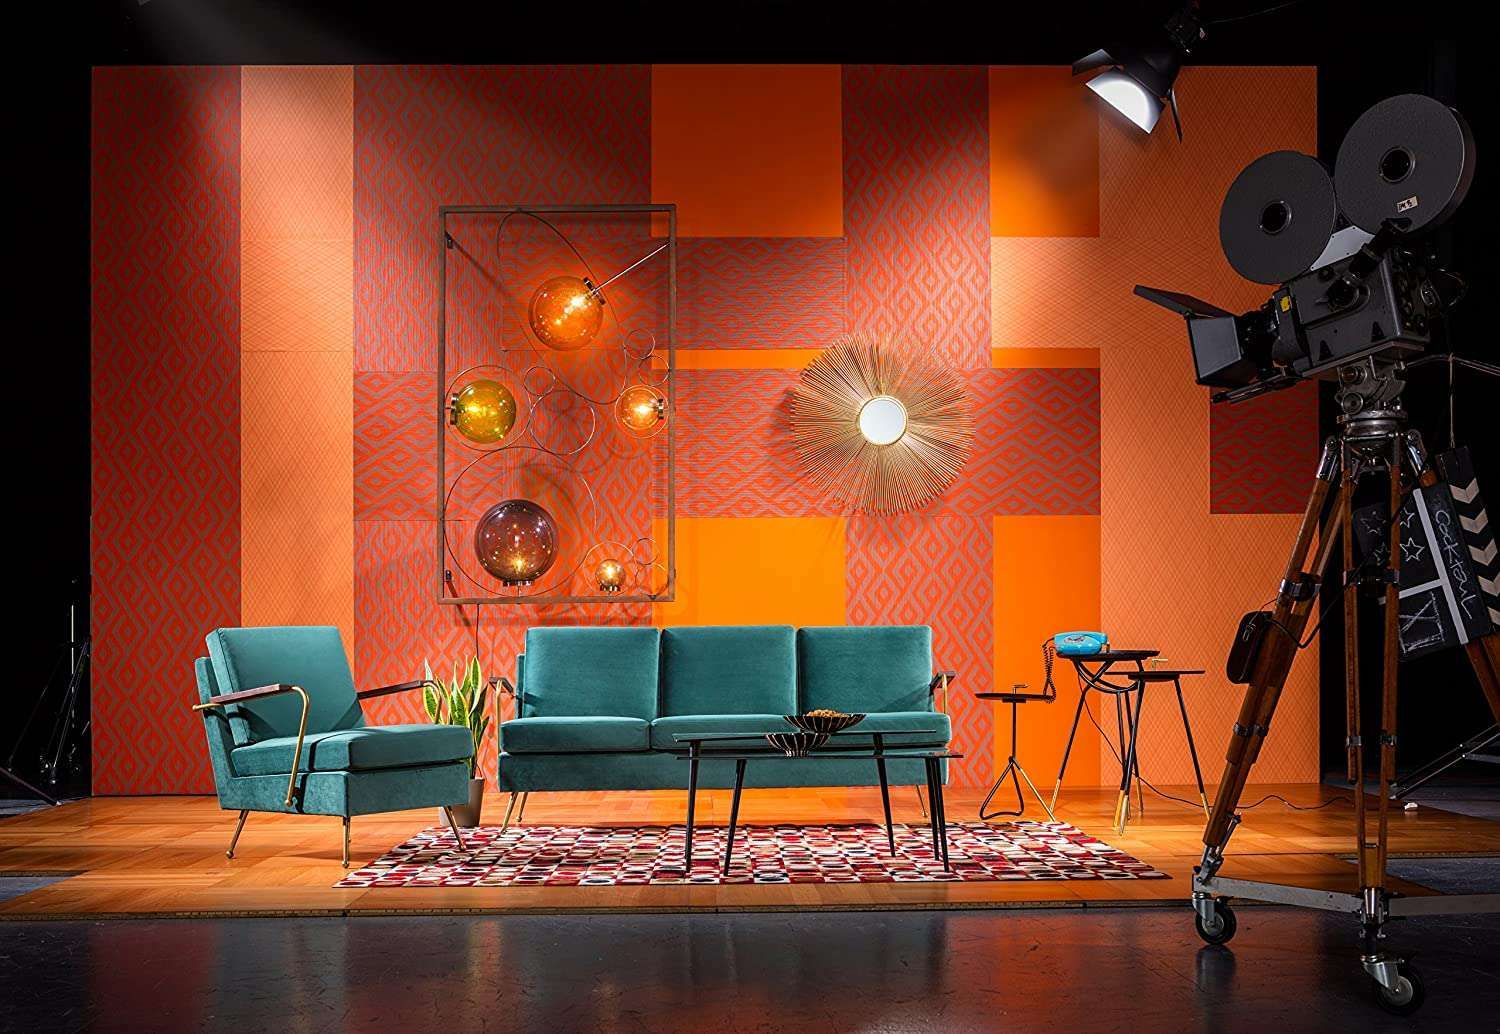 Mirrors Press profile homify Modern living room Furniture, Couch, Stage is empty, Orange, Chair, Interior design, Entertainment, Tripod, Table, Performing arts